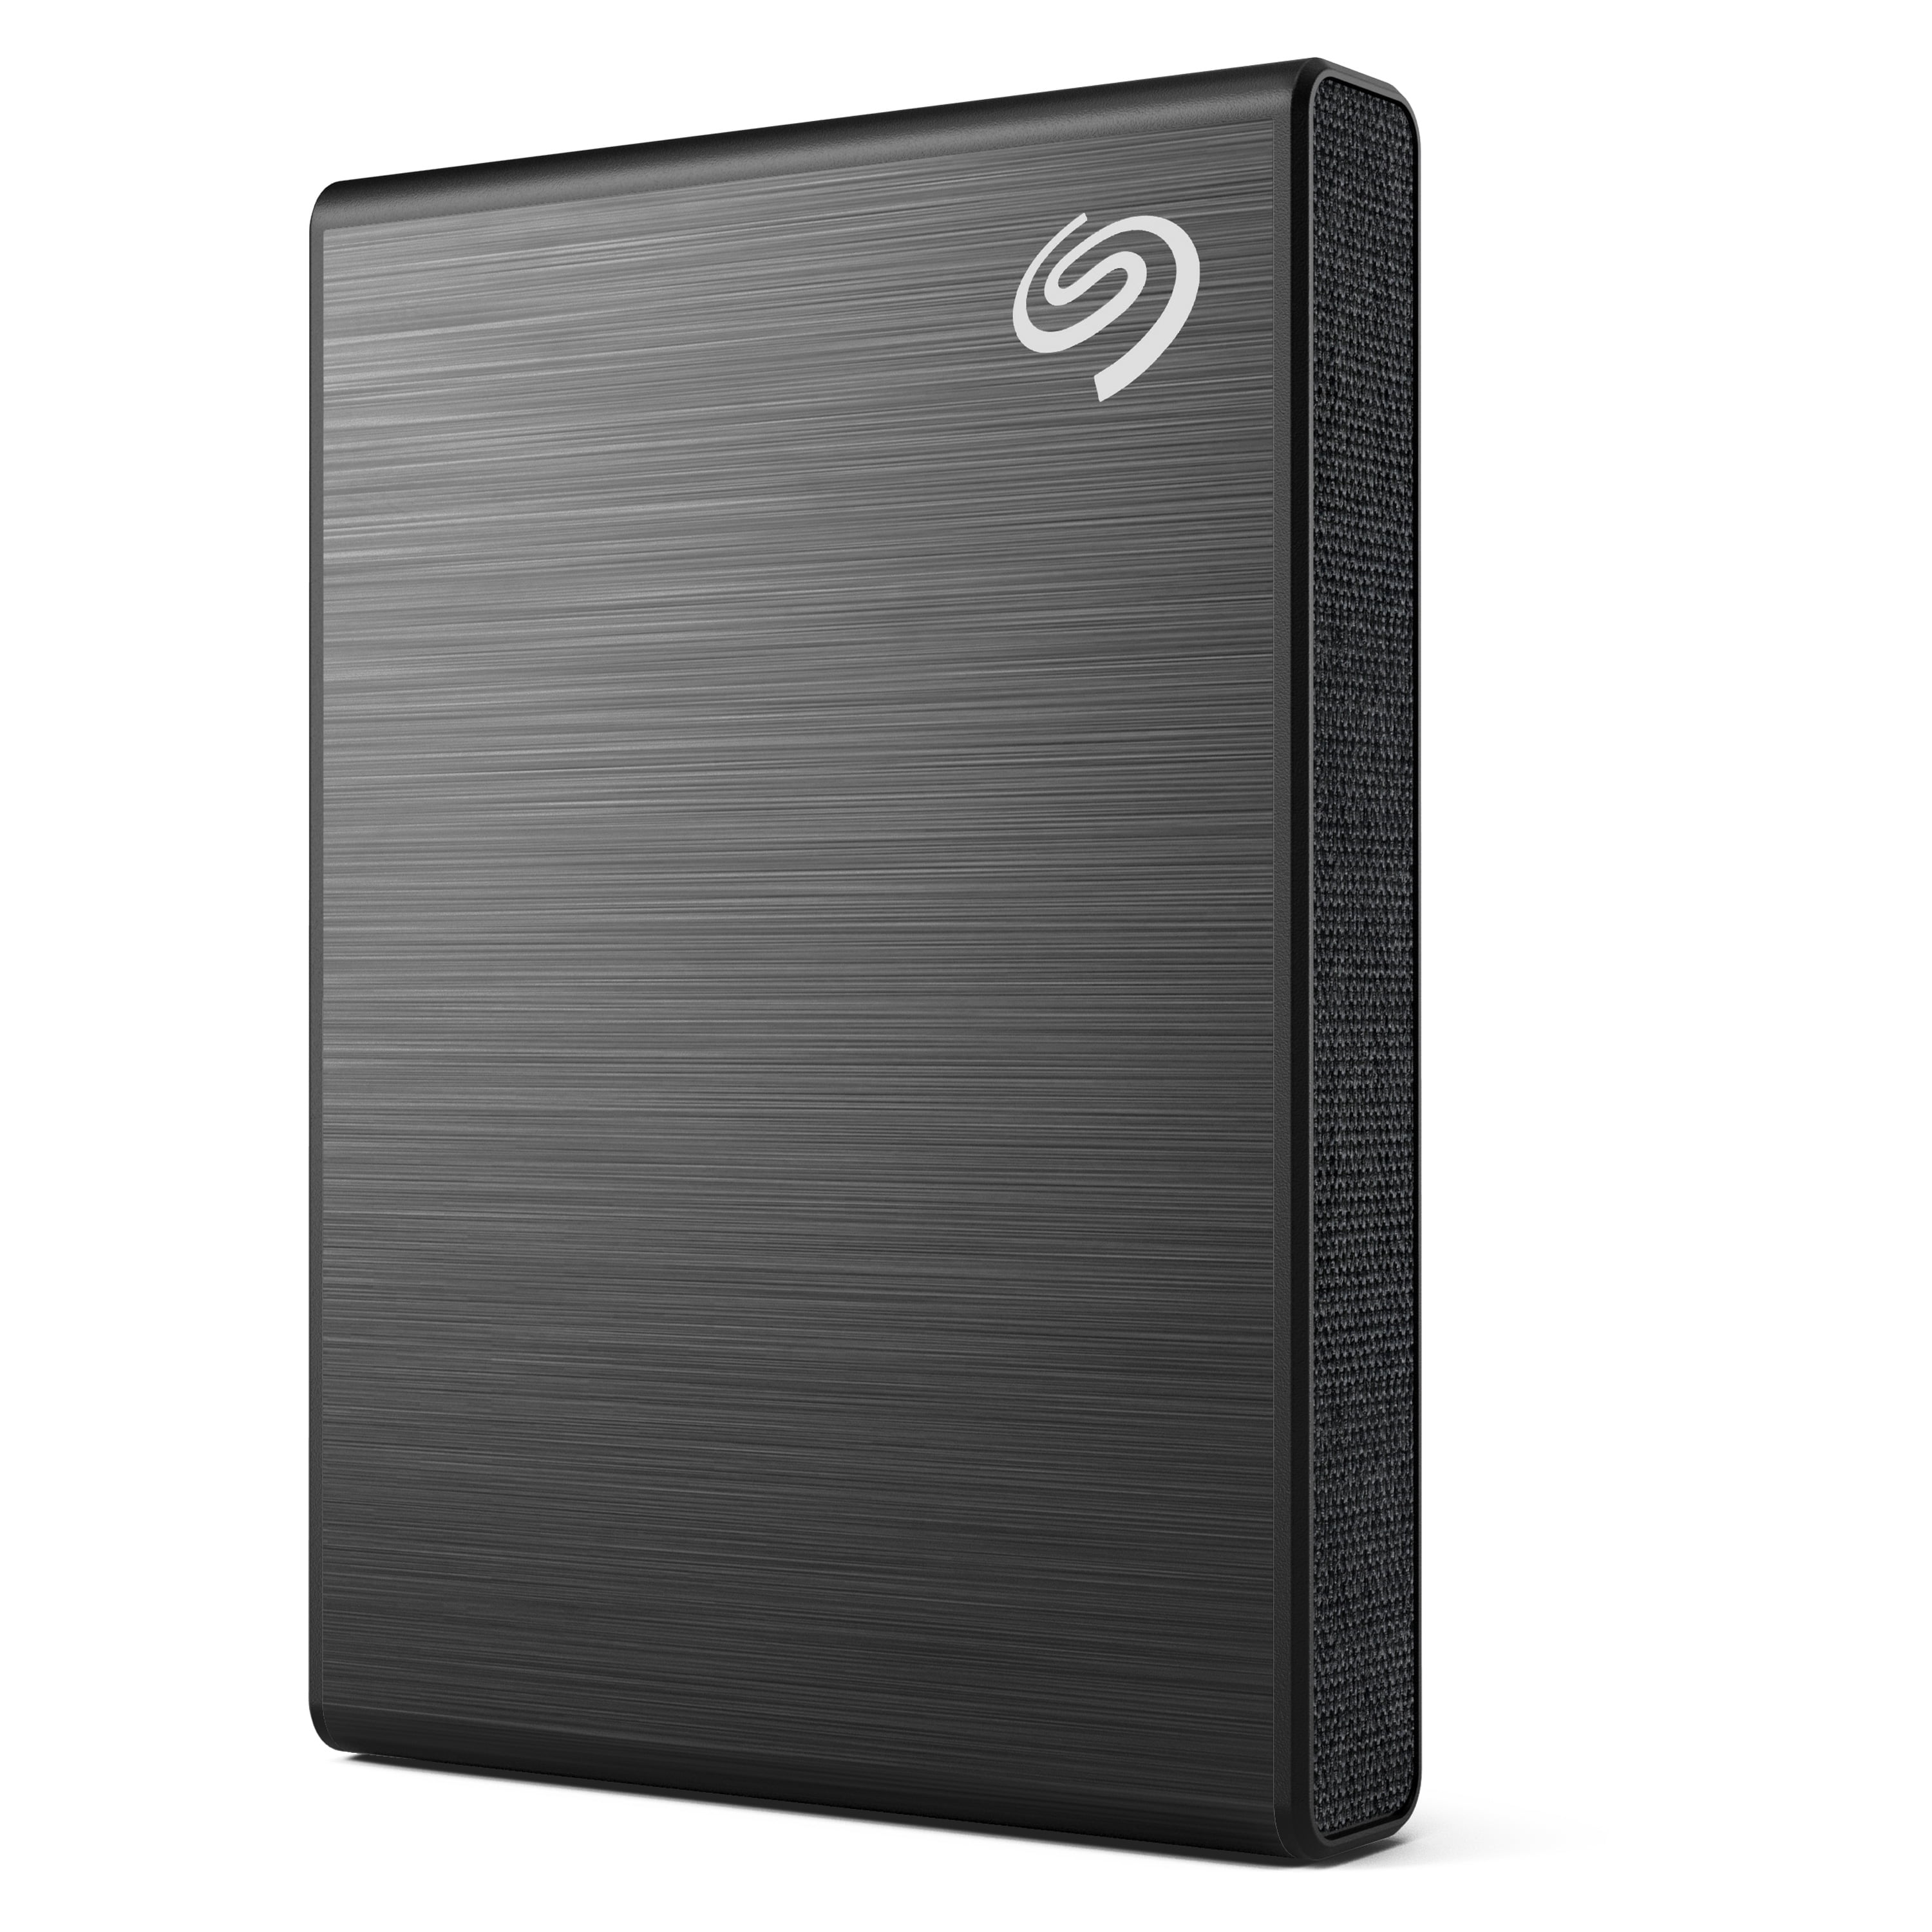 Game Drive Seagate and State for Solid External PS5- Drive, (STKG500406) PS4 500GB Black